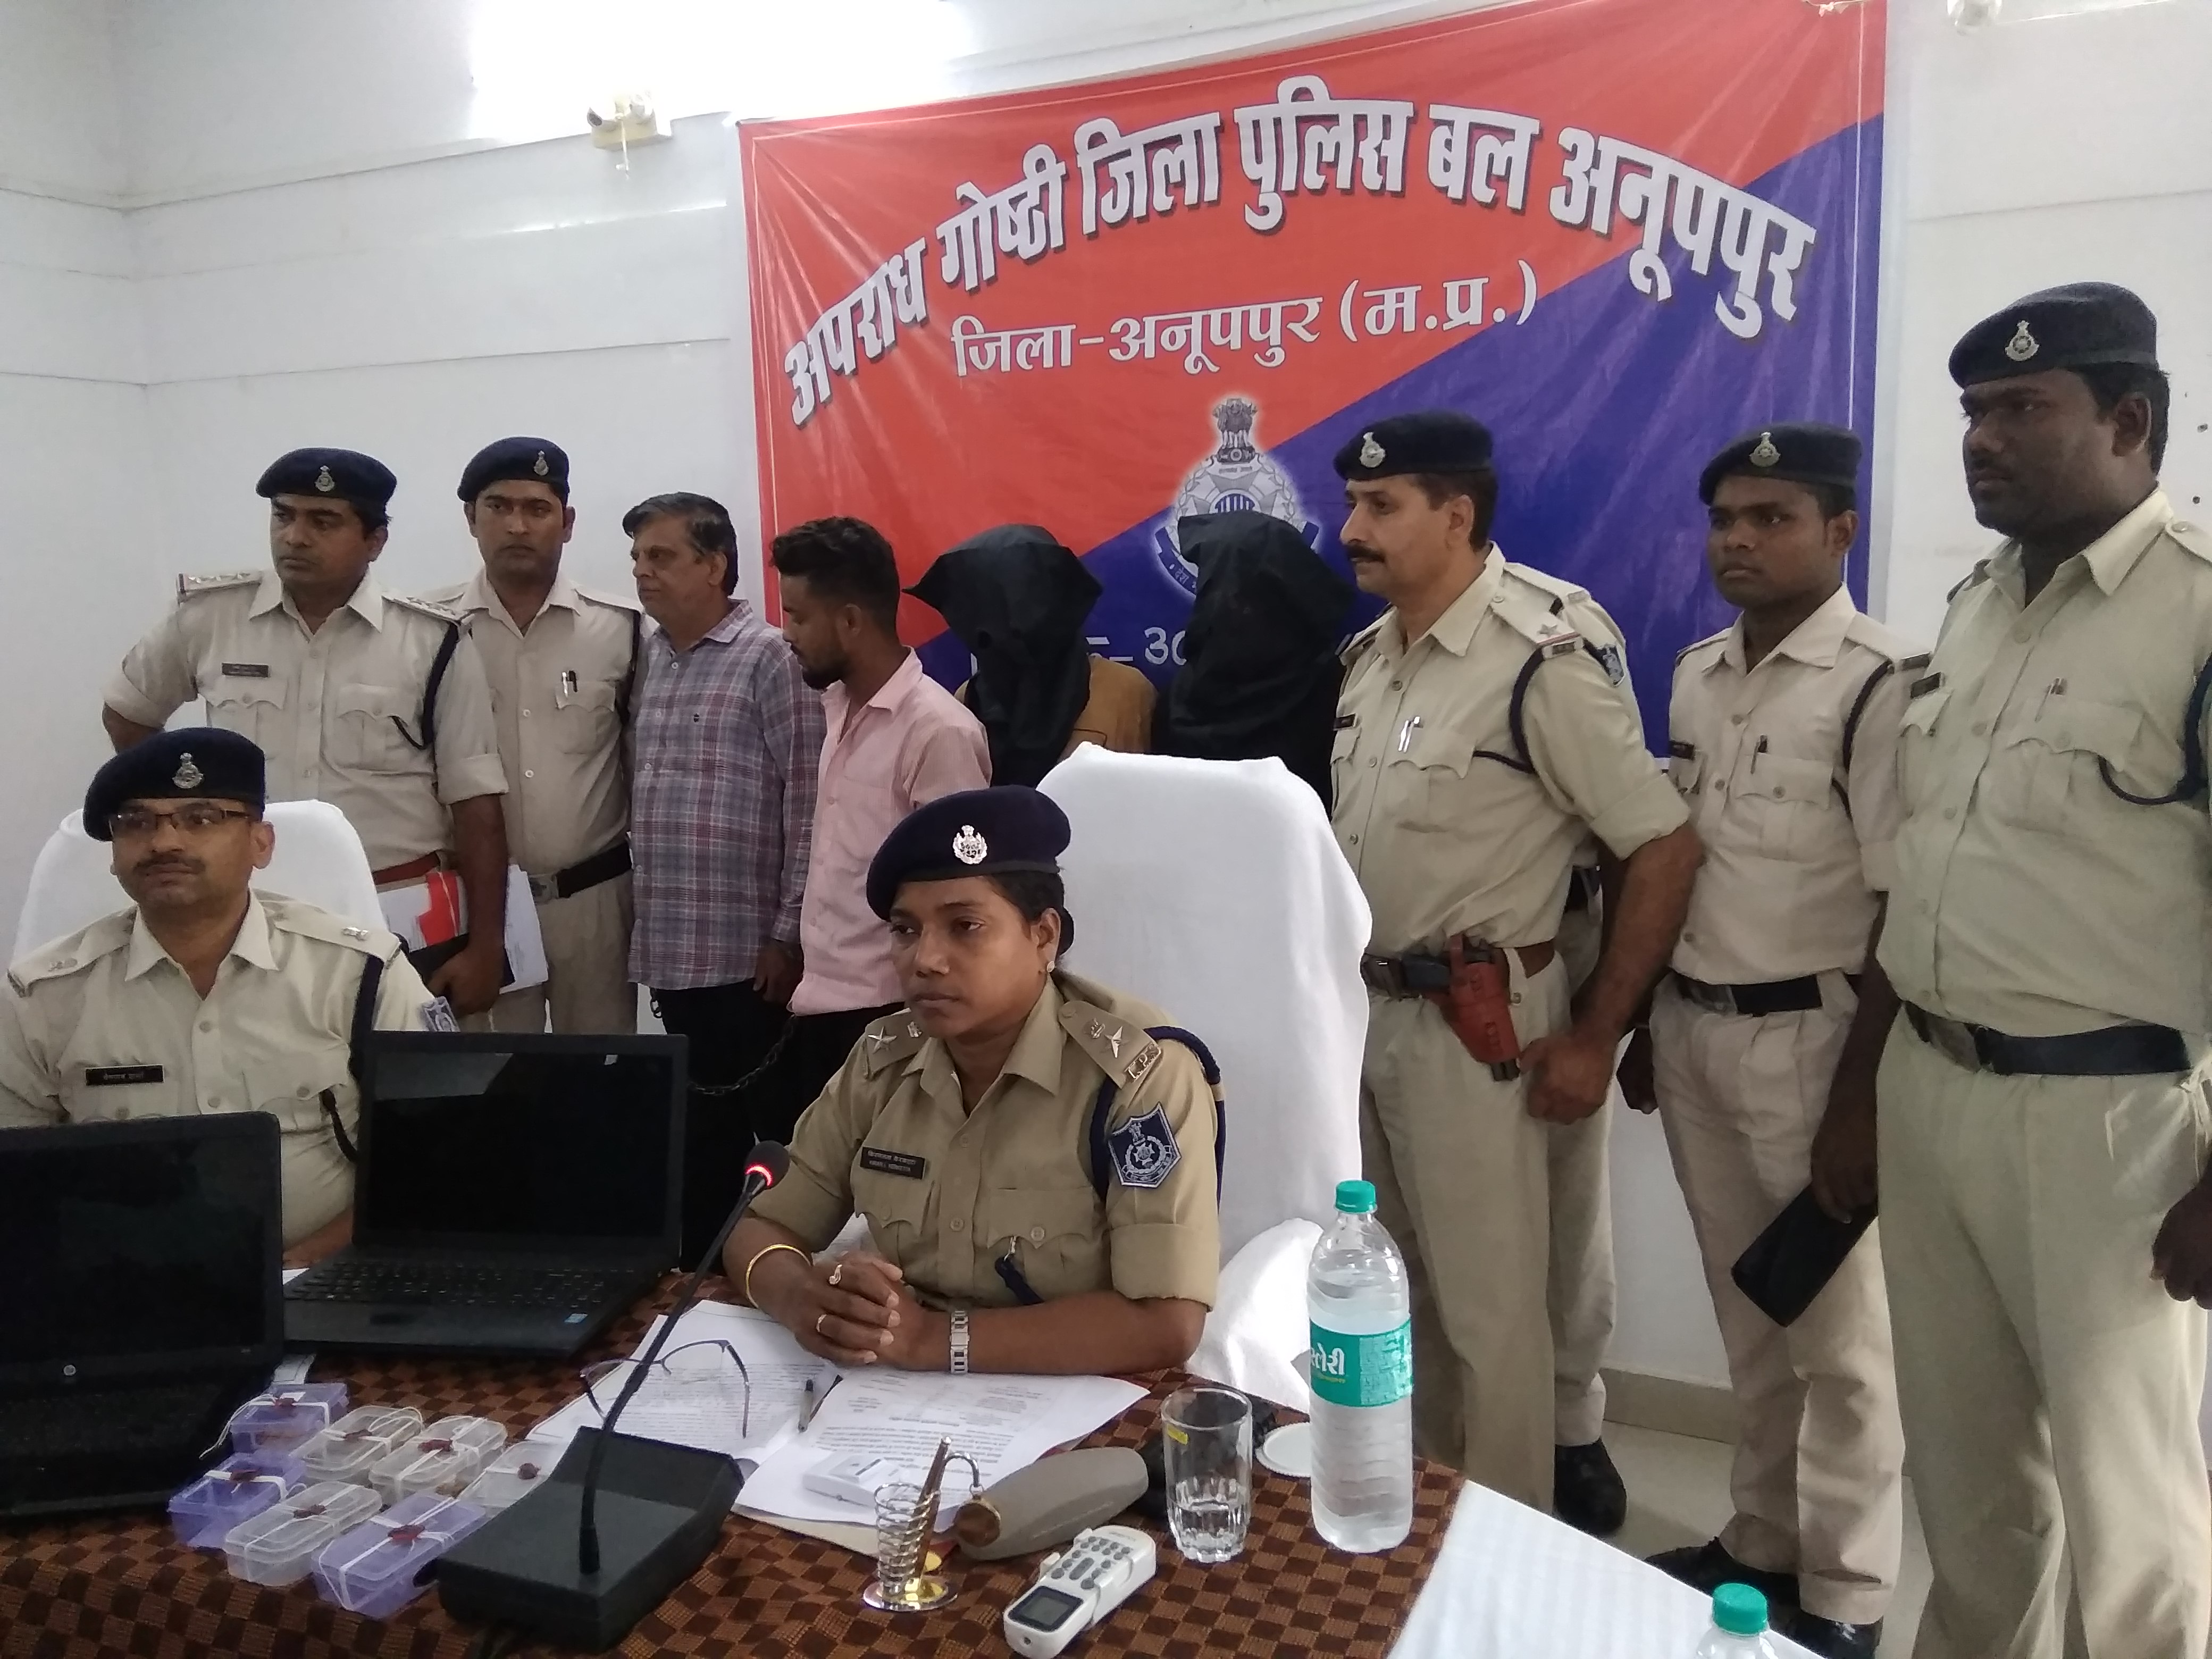 8 Chain Looter Two accused and two businessmen arrested, seized 5 lakh